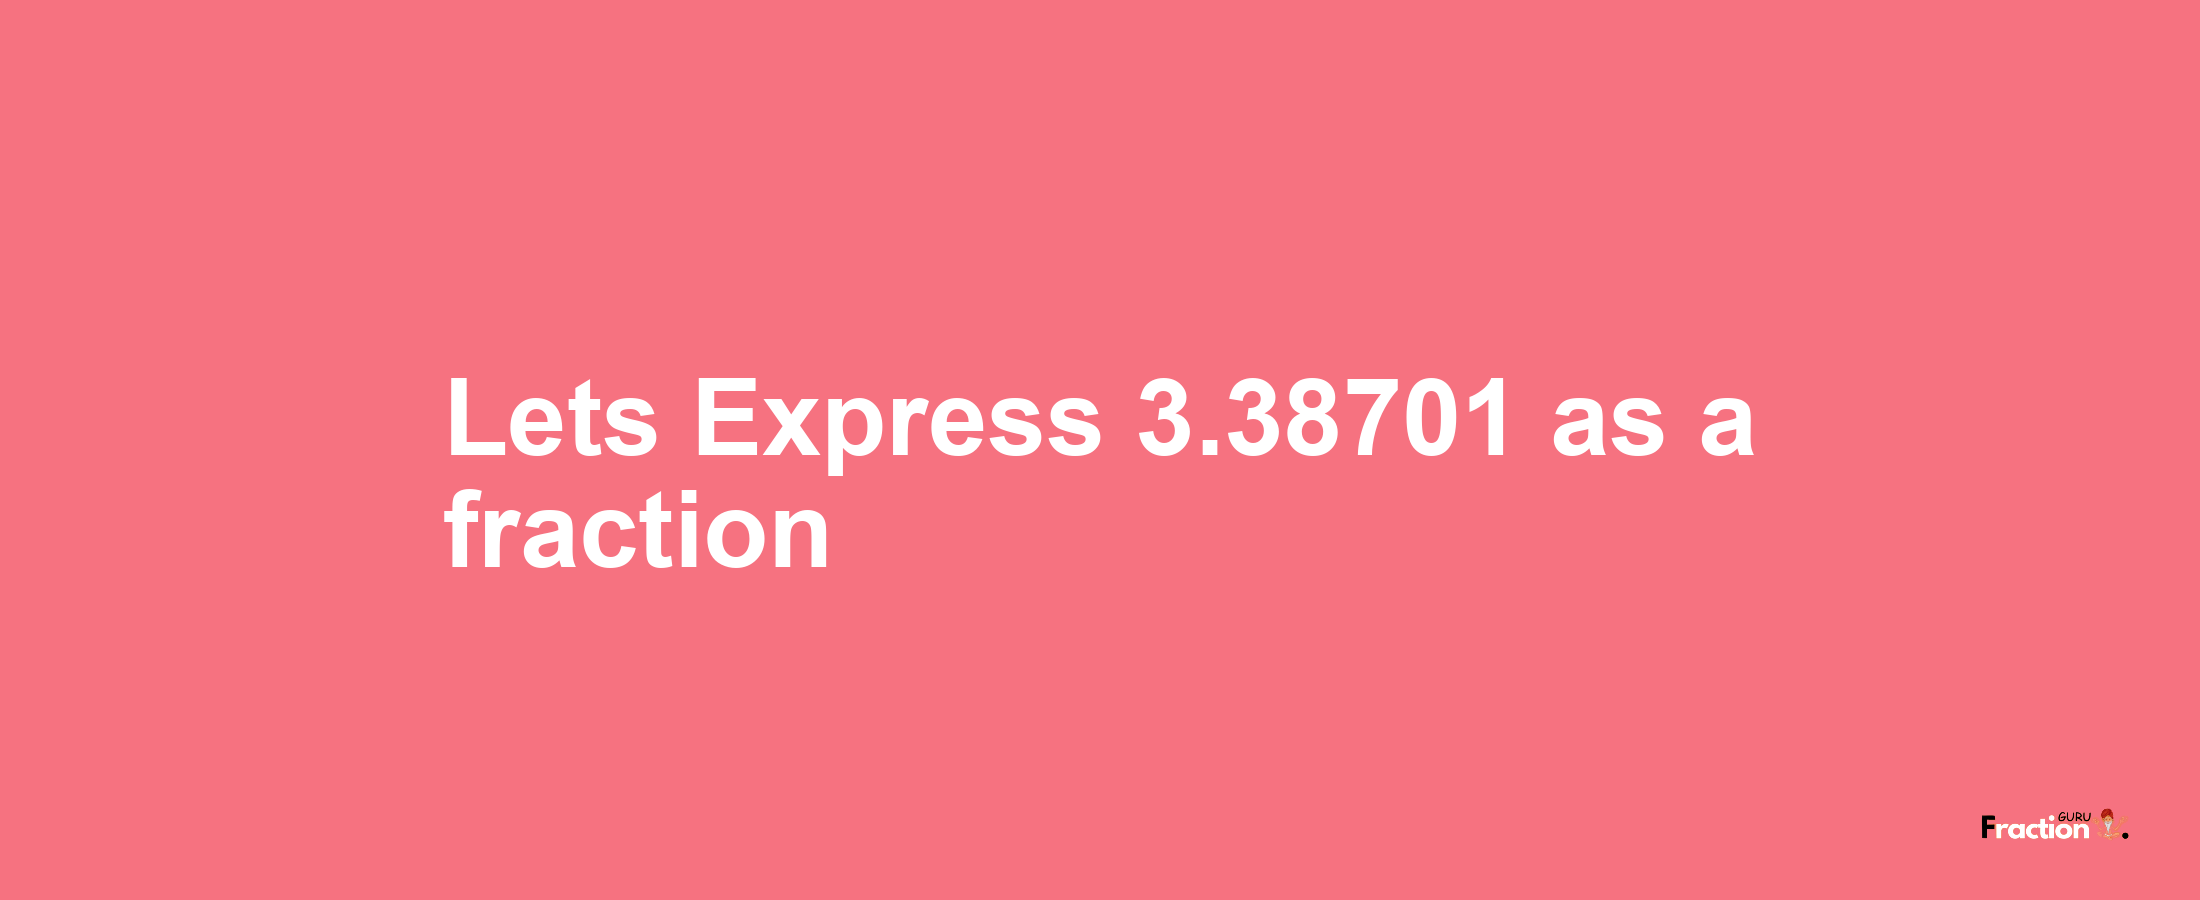 Lets Express 3.38701 as afraction